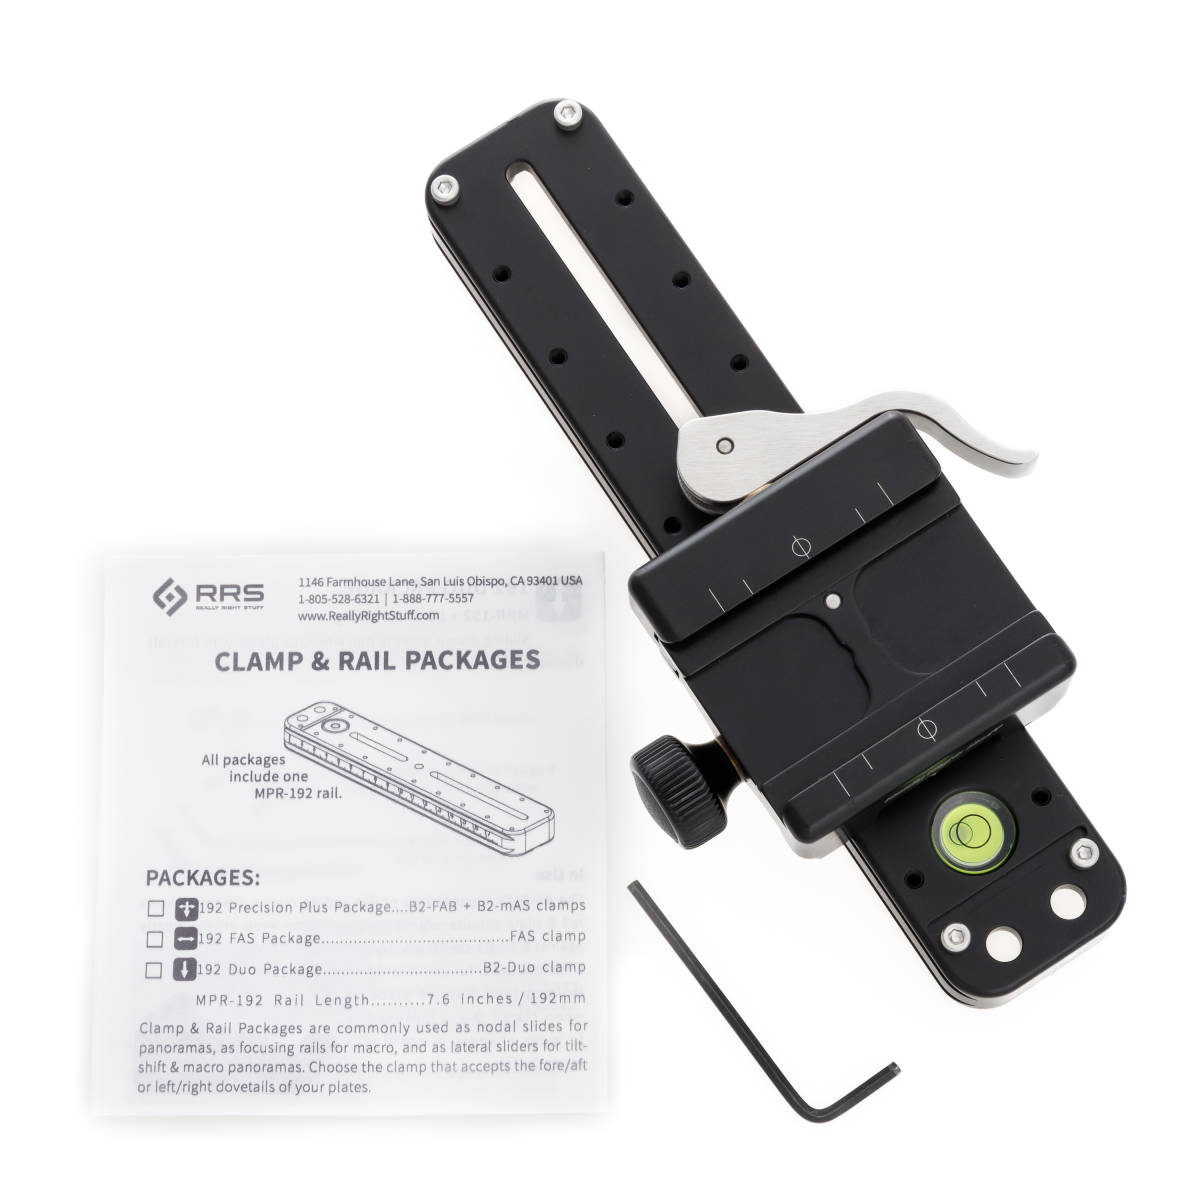 RRS MPR-192 Lever Release Package リアリーライトスタッフ レバーリリースクランプ パノラマ ノーダル